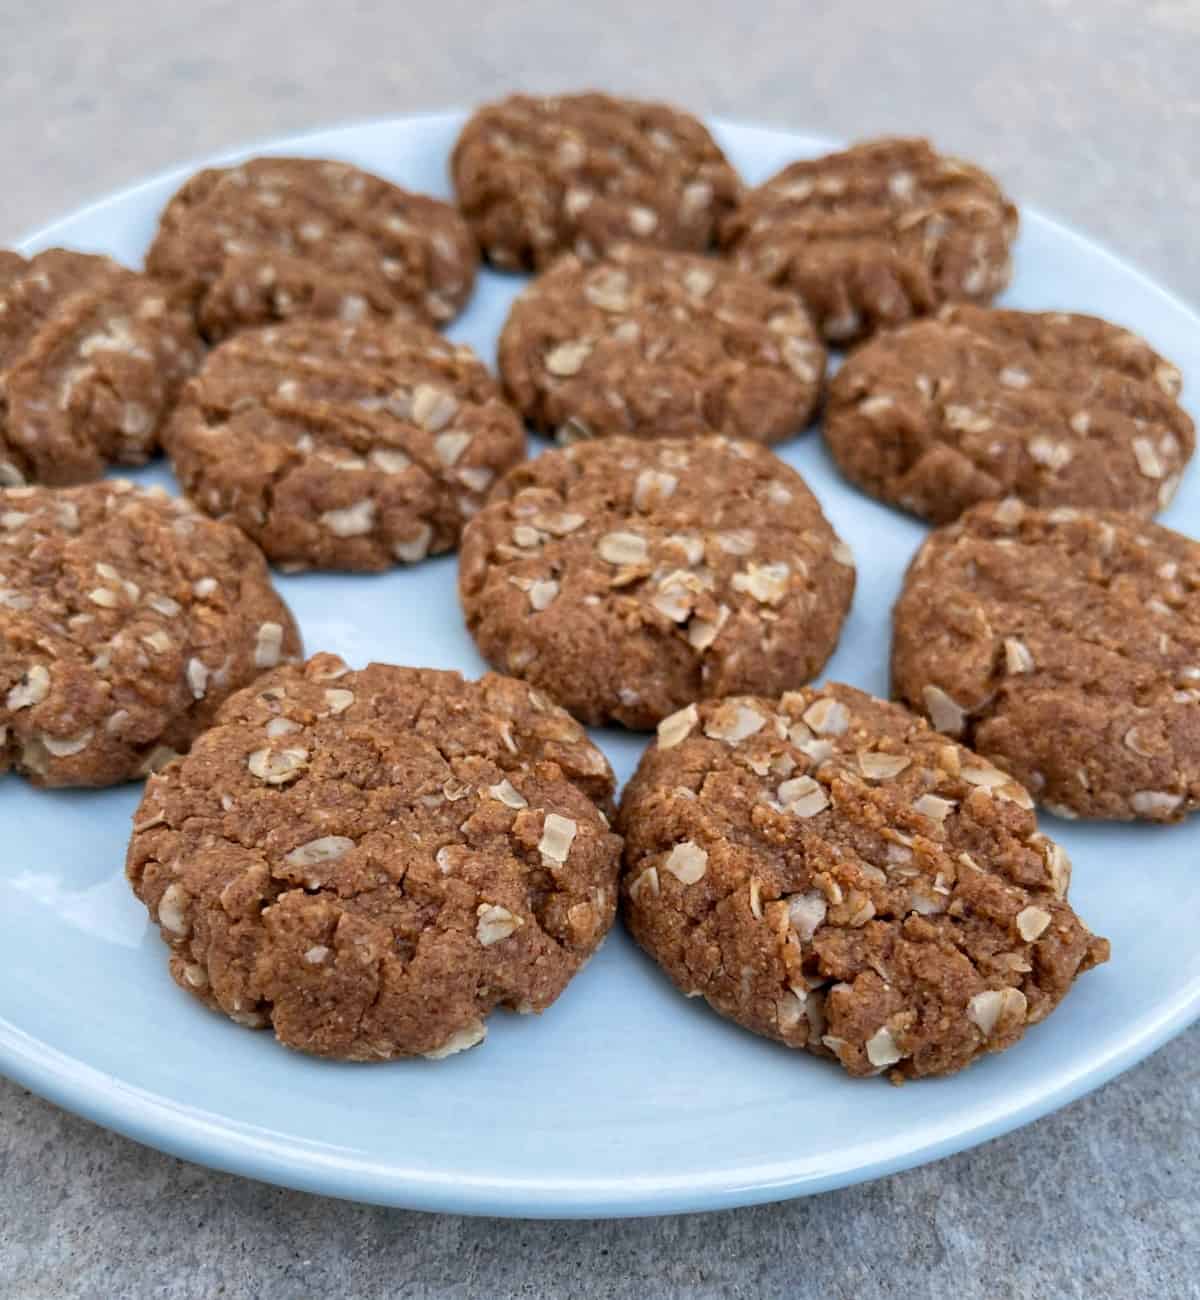 Soft and chewy almond butter cookies on a blue serving plate.